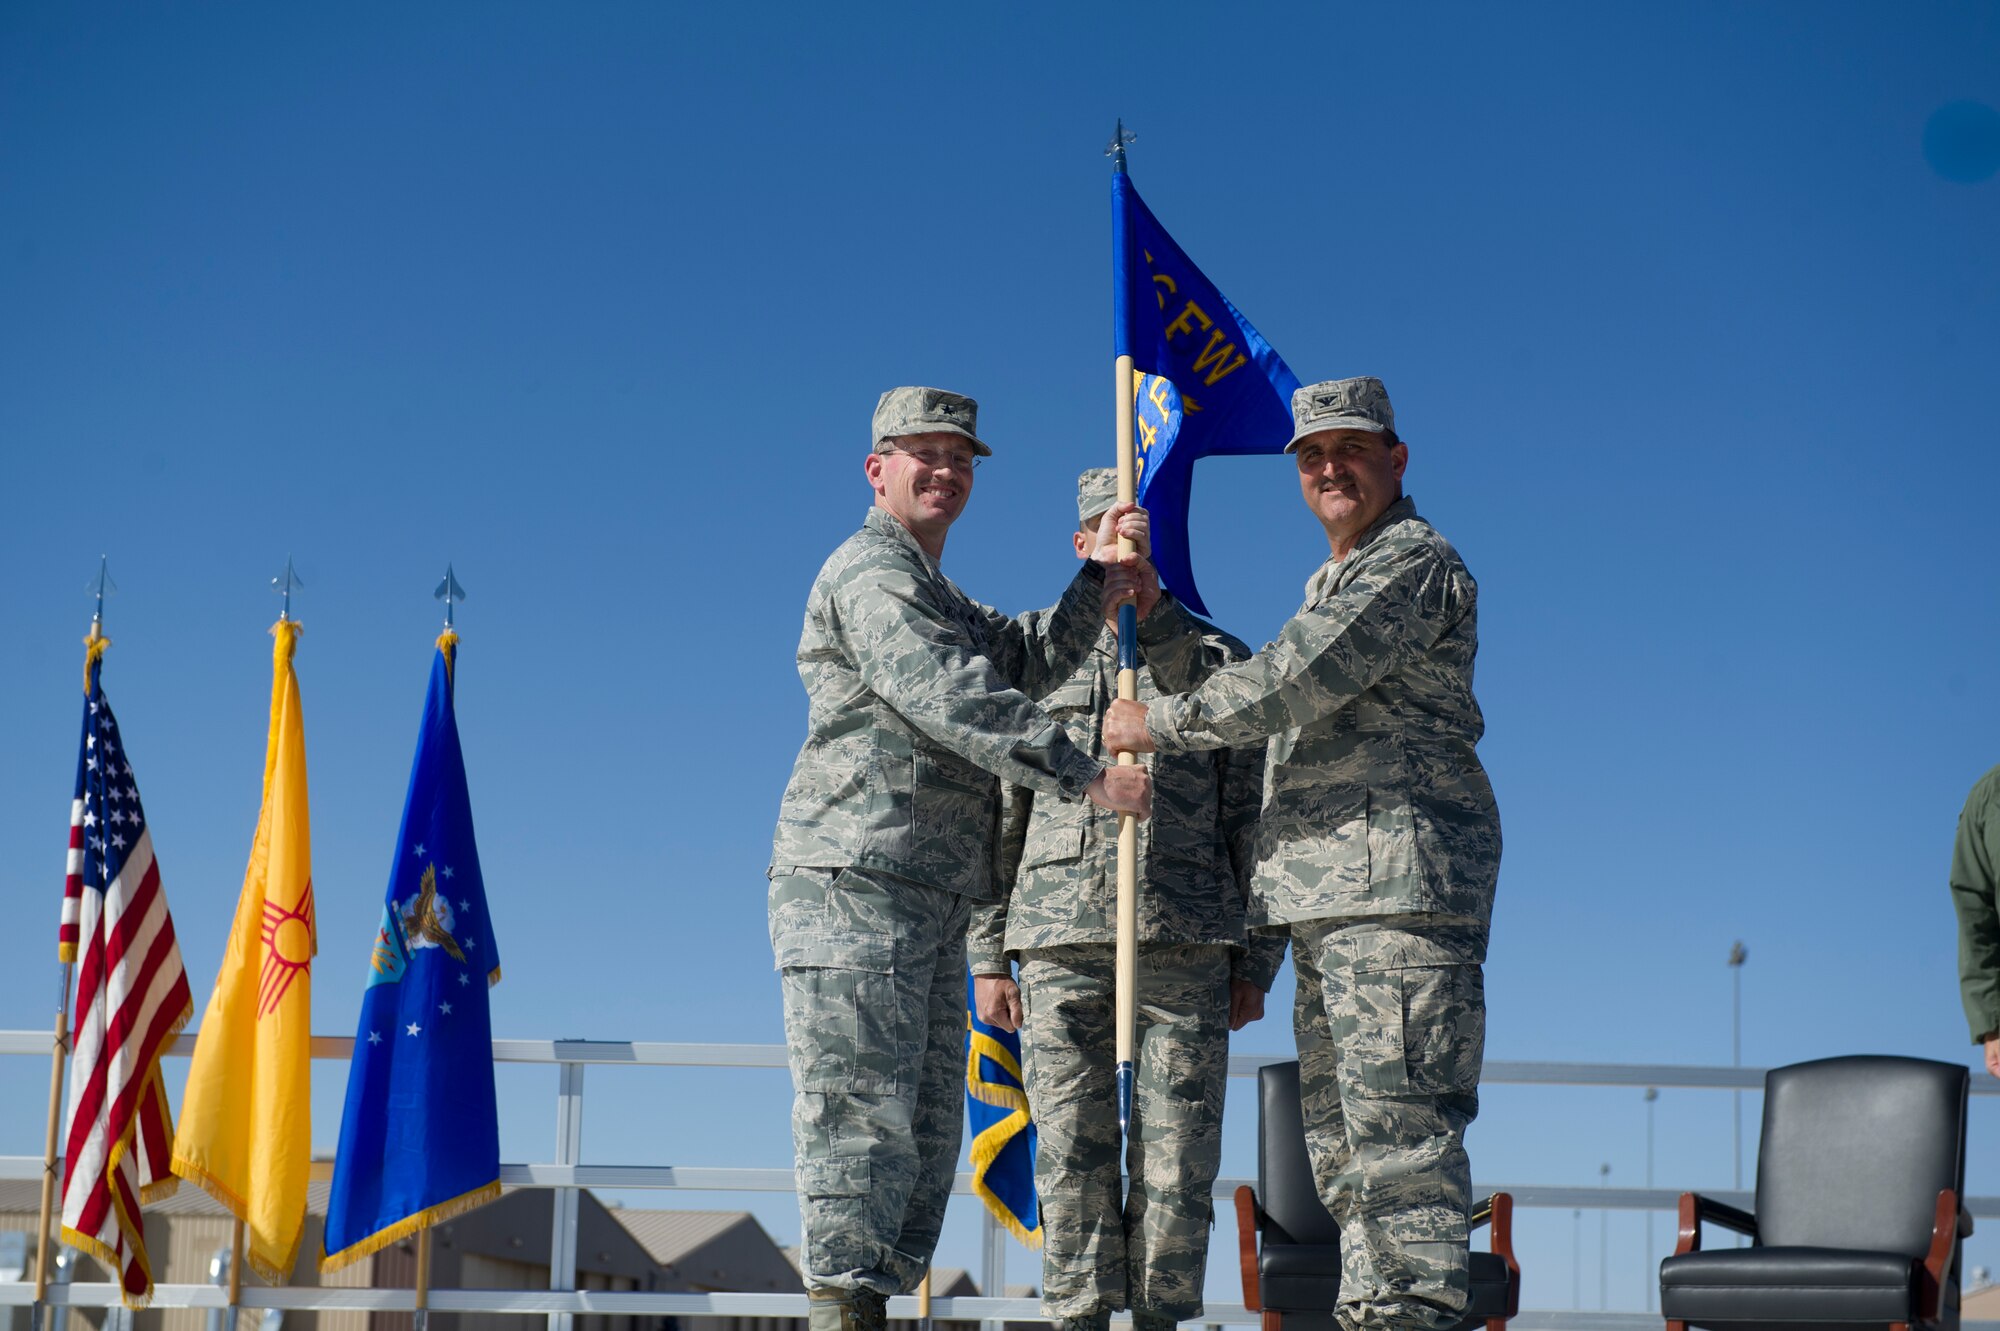 Brigadier Gen. Michael Rothstein, 56th Fighter Wing commander, passes the guidon of the 54th Fighter Group to Col.l Rodney Petithomme during the 54th Fighter group activation ceremony at Holloman Air Force Base, N.M., March 11. The 54th Fighter Group, a tenant unit at Holloman, is a detachment the 56th Fighter Wing at Luke Air Force Base, Ariz., and will ultimately operate two F-16 Fighting Falcon aircraft training squadrons. The 54th Fighter Group plus three squadrons were activated at the ceremony: the 311th Fighter Squadron, the 54th Operations Support Squadron and the 54th Aircraft Maintenance Squadron. (U.S. Air Force photo by Airman 1st Class Chase A. Cannon/Released)